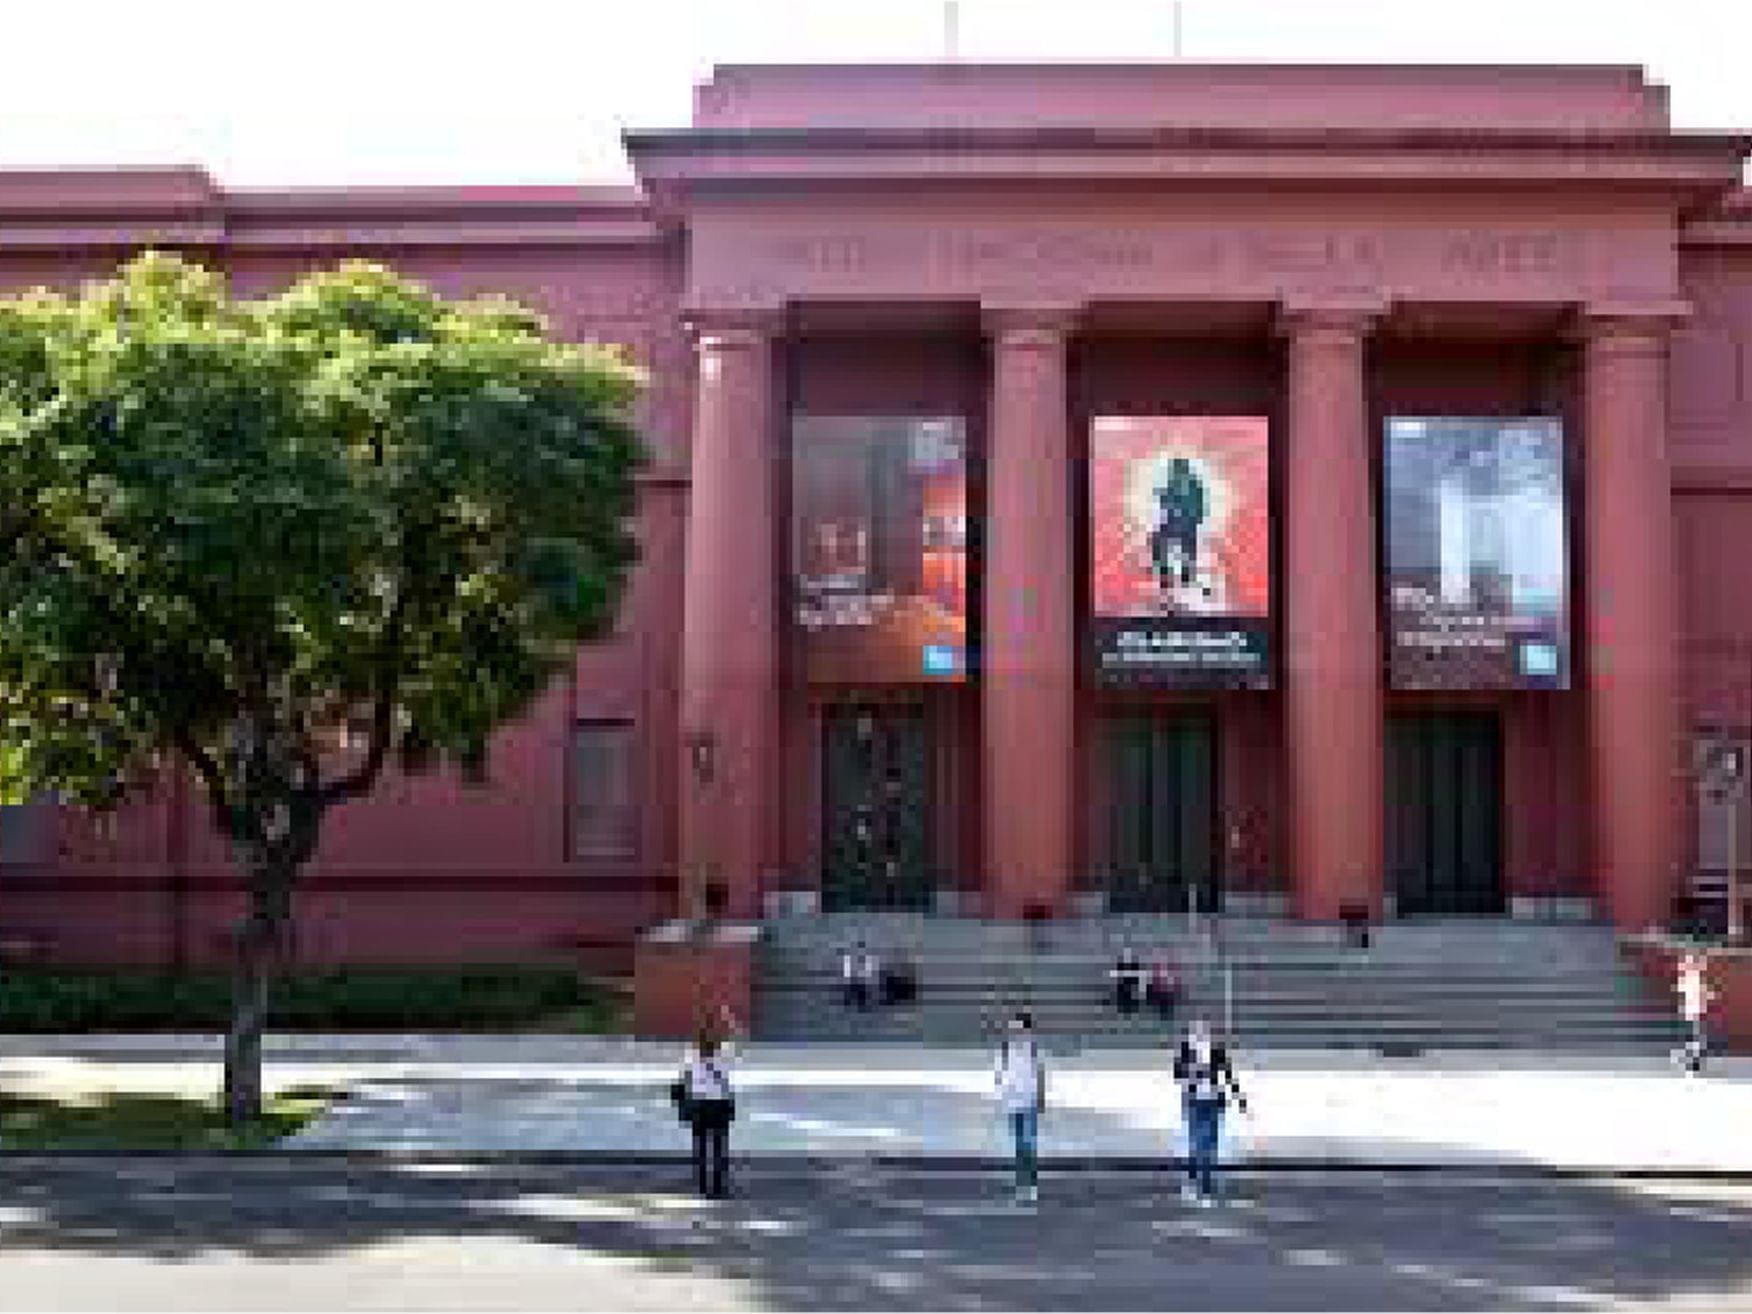 An exterior view of National Museum near Recoleta Grand Hotel